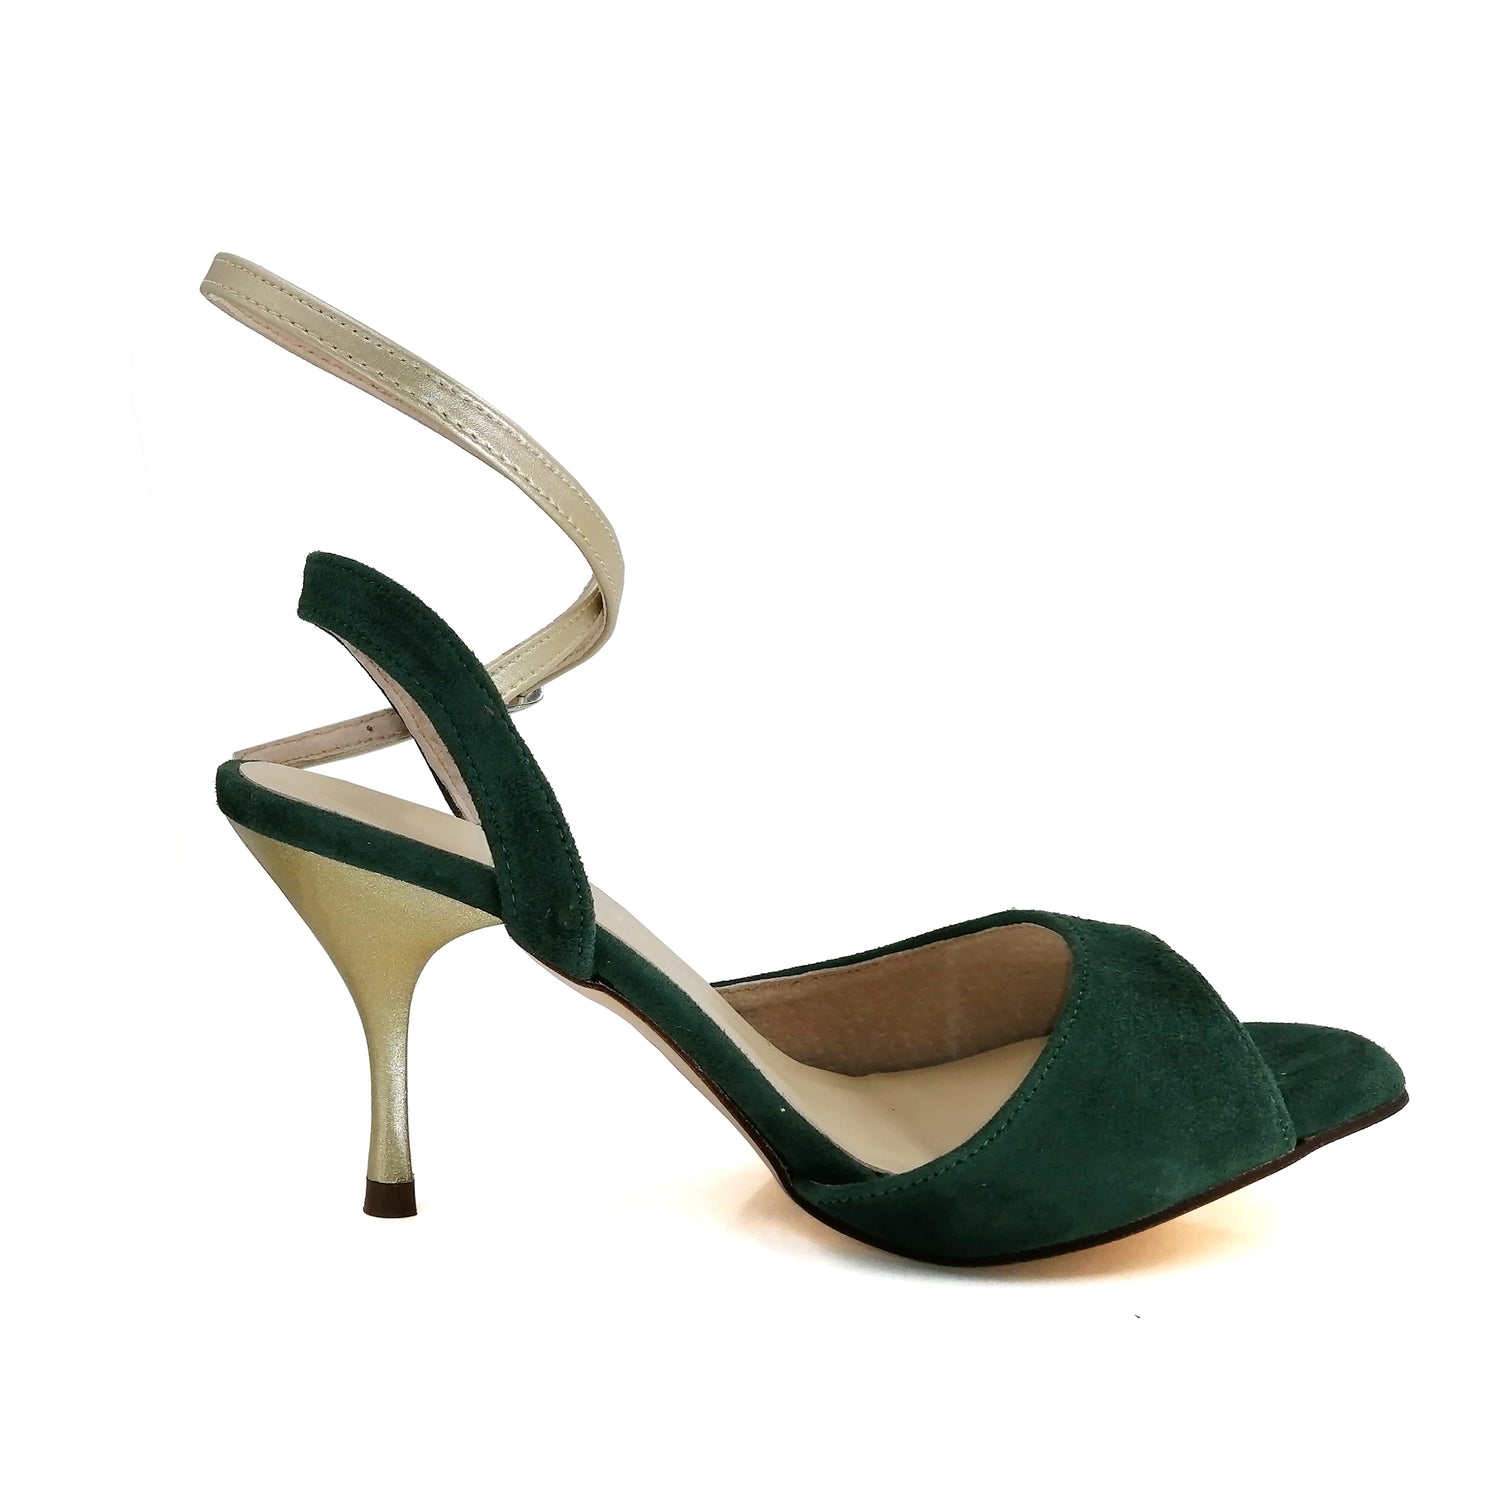 Pro Dancer Argentine Tango Shoes with Leather Sole and Dark Green Heels1